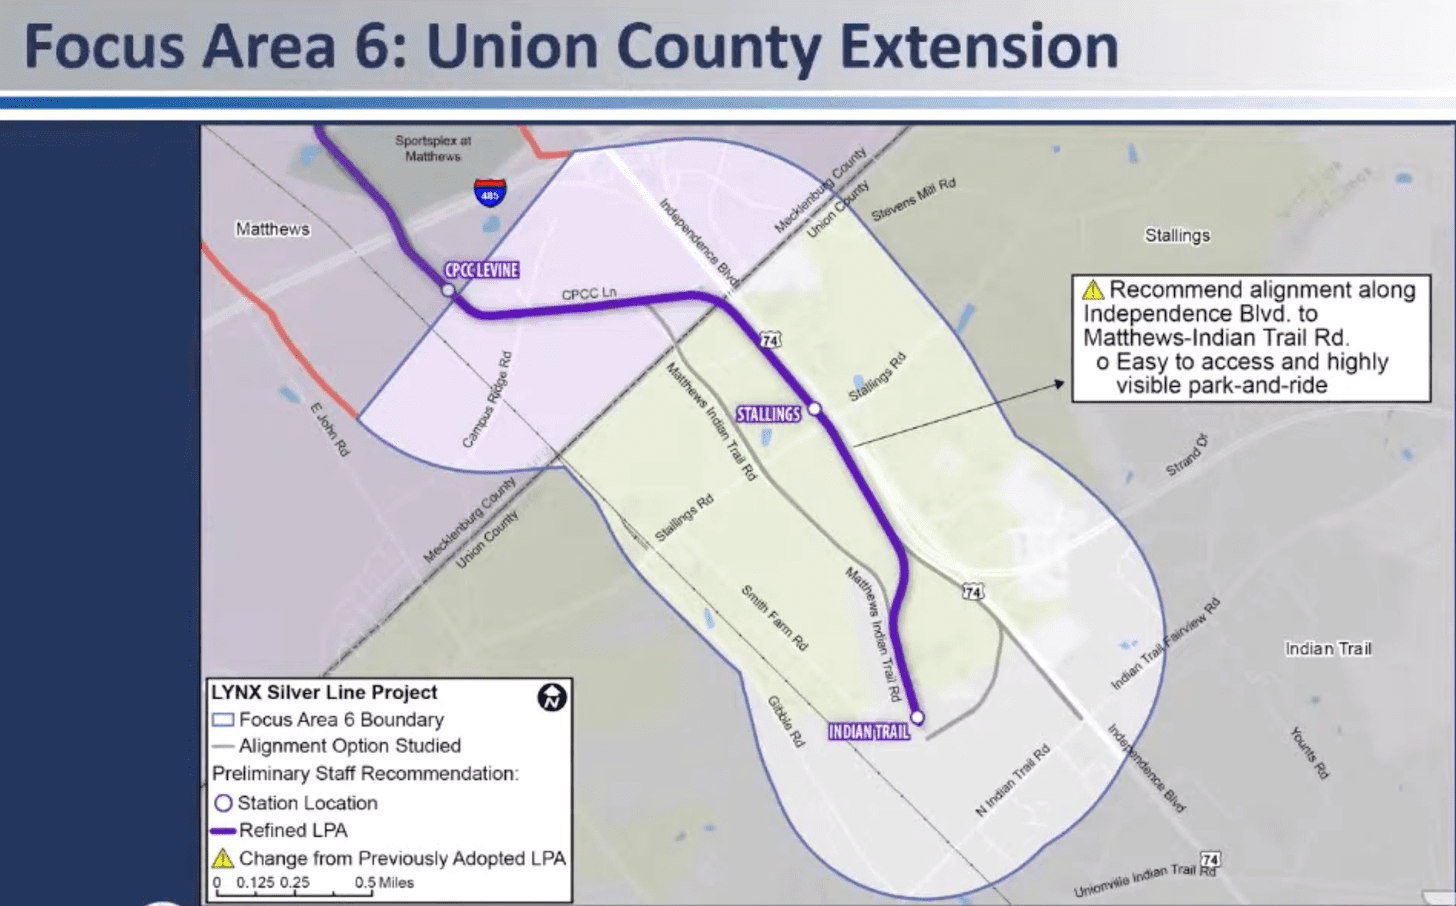 A map showing the train line extending to Indian Trail in Union County